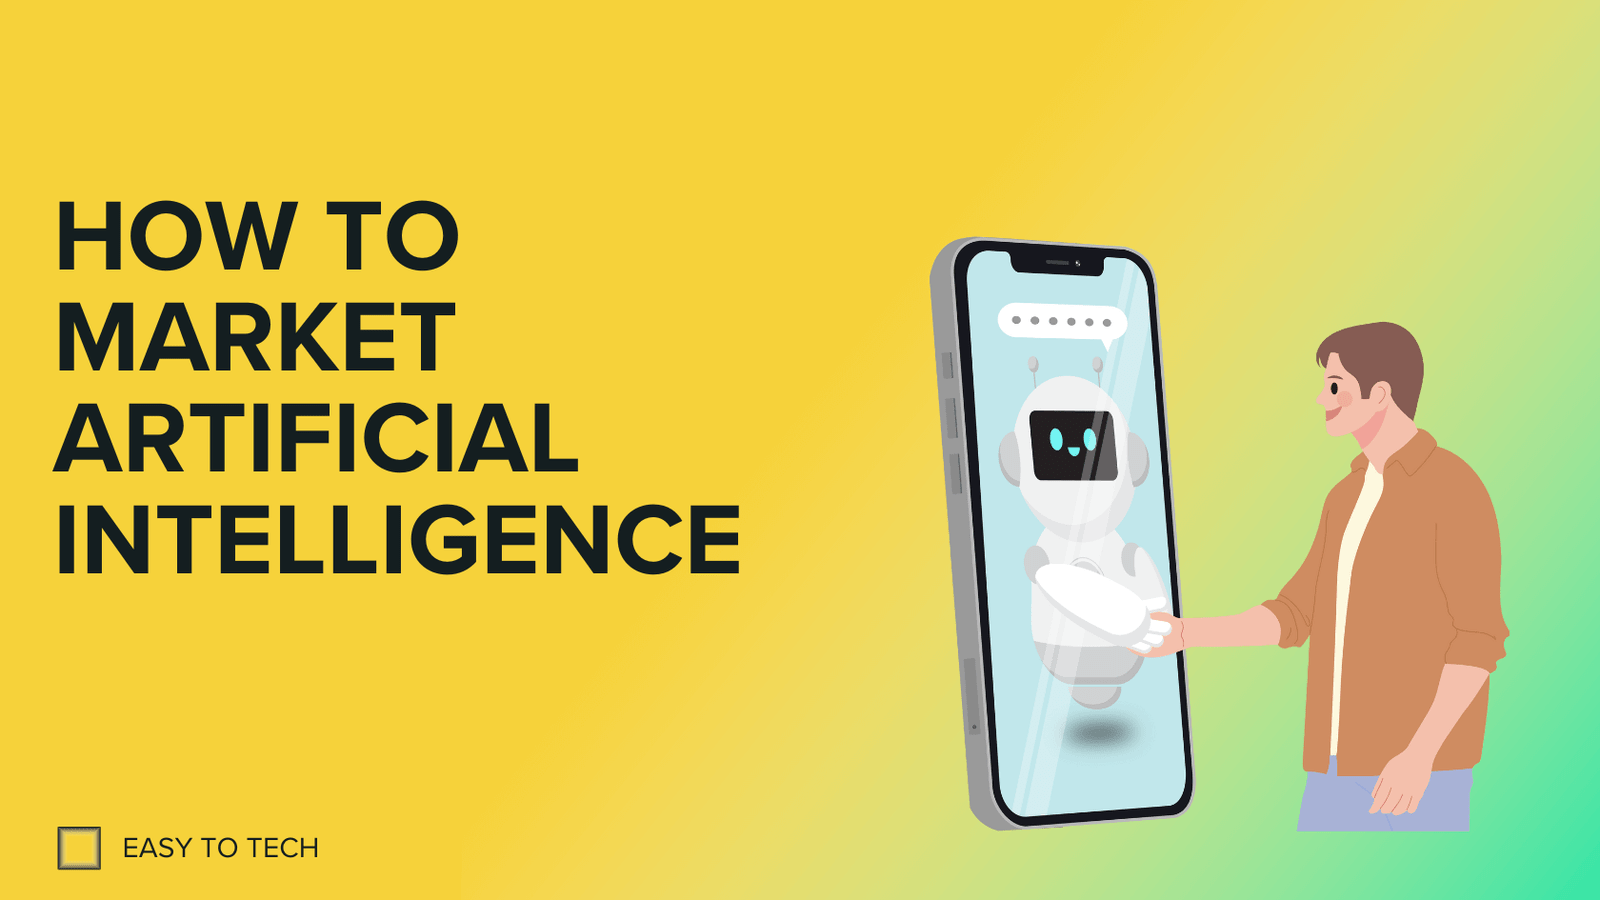 HOW TO MARKET ARTIFICIAL INTELLIGENCE